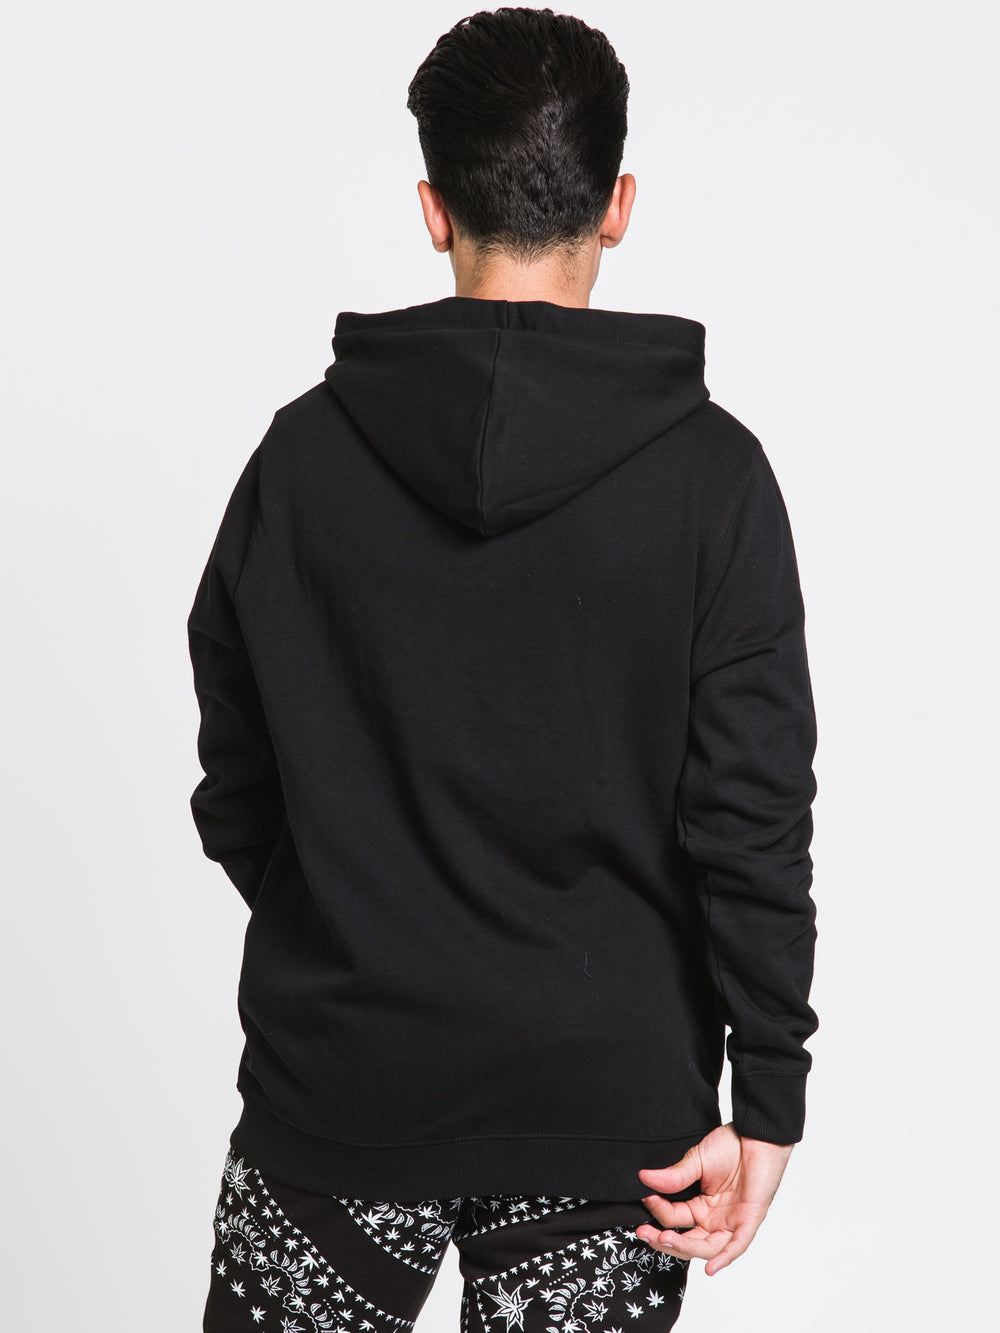 CROOKS & CASTLES LUX EMBROIDERED LOGO PULLOVER HOODIE - CLEARANCE